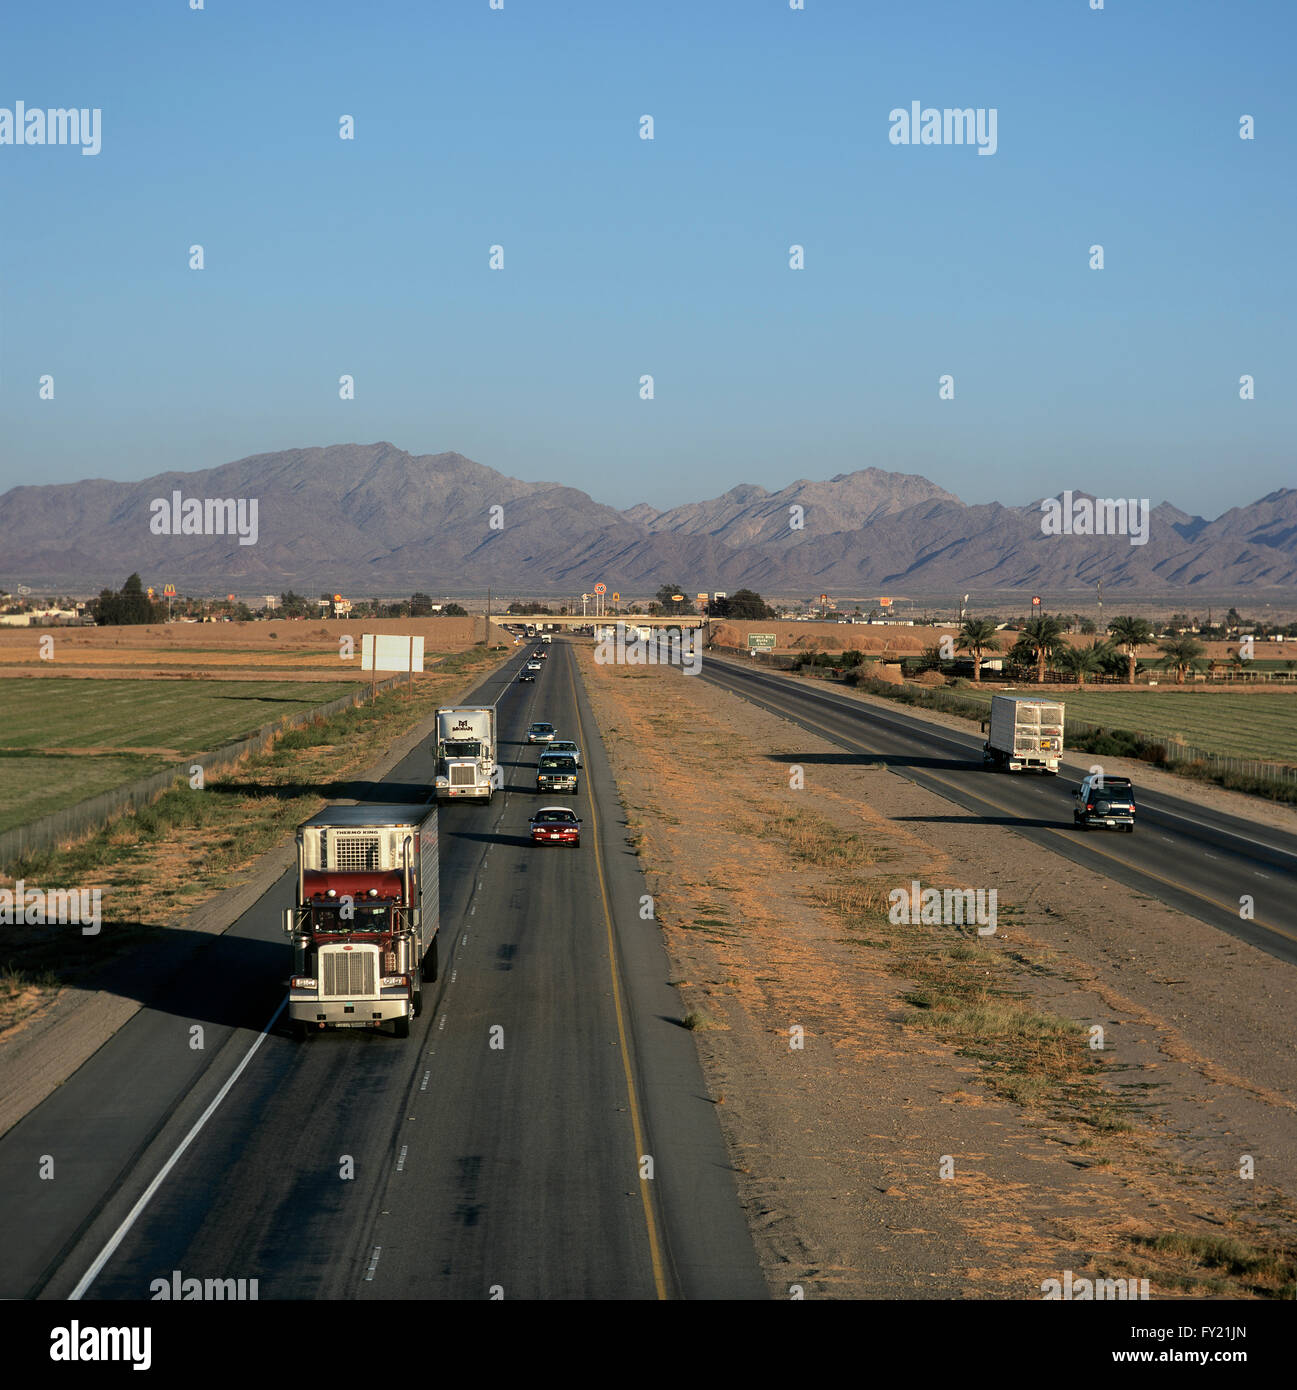 Late evening traffic on interstate 10, near Blythe, eastern California. Looking towards mountains in nearby Arizona. Stock Photo